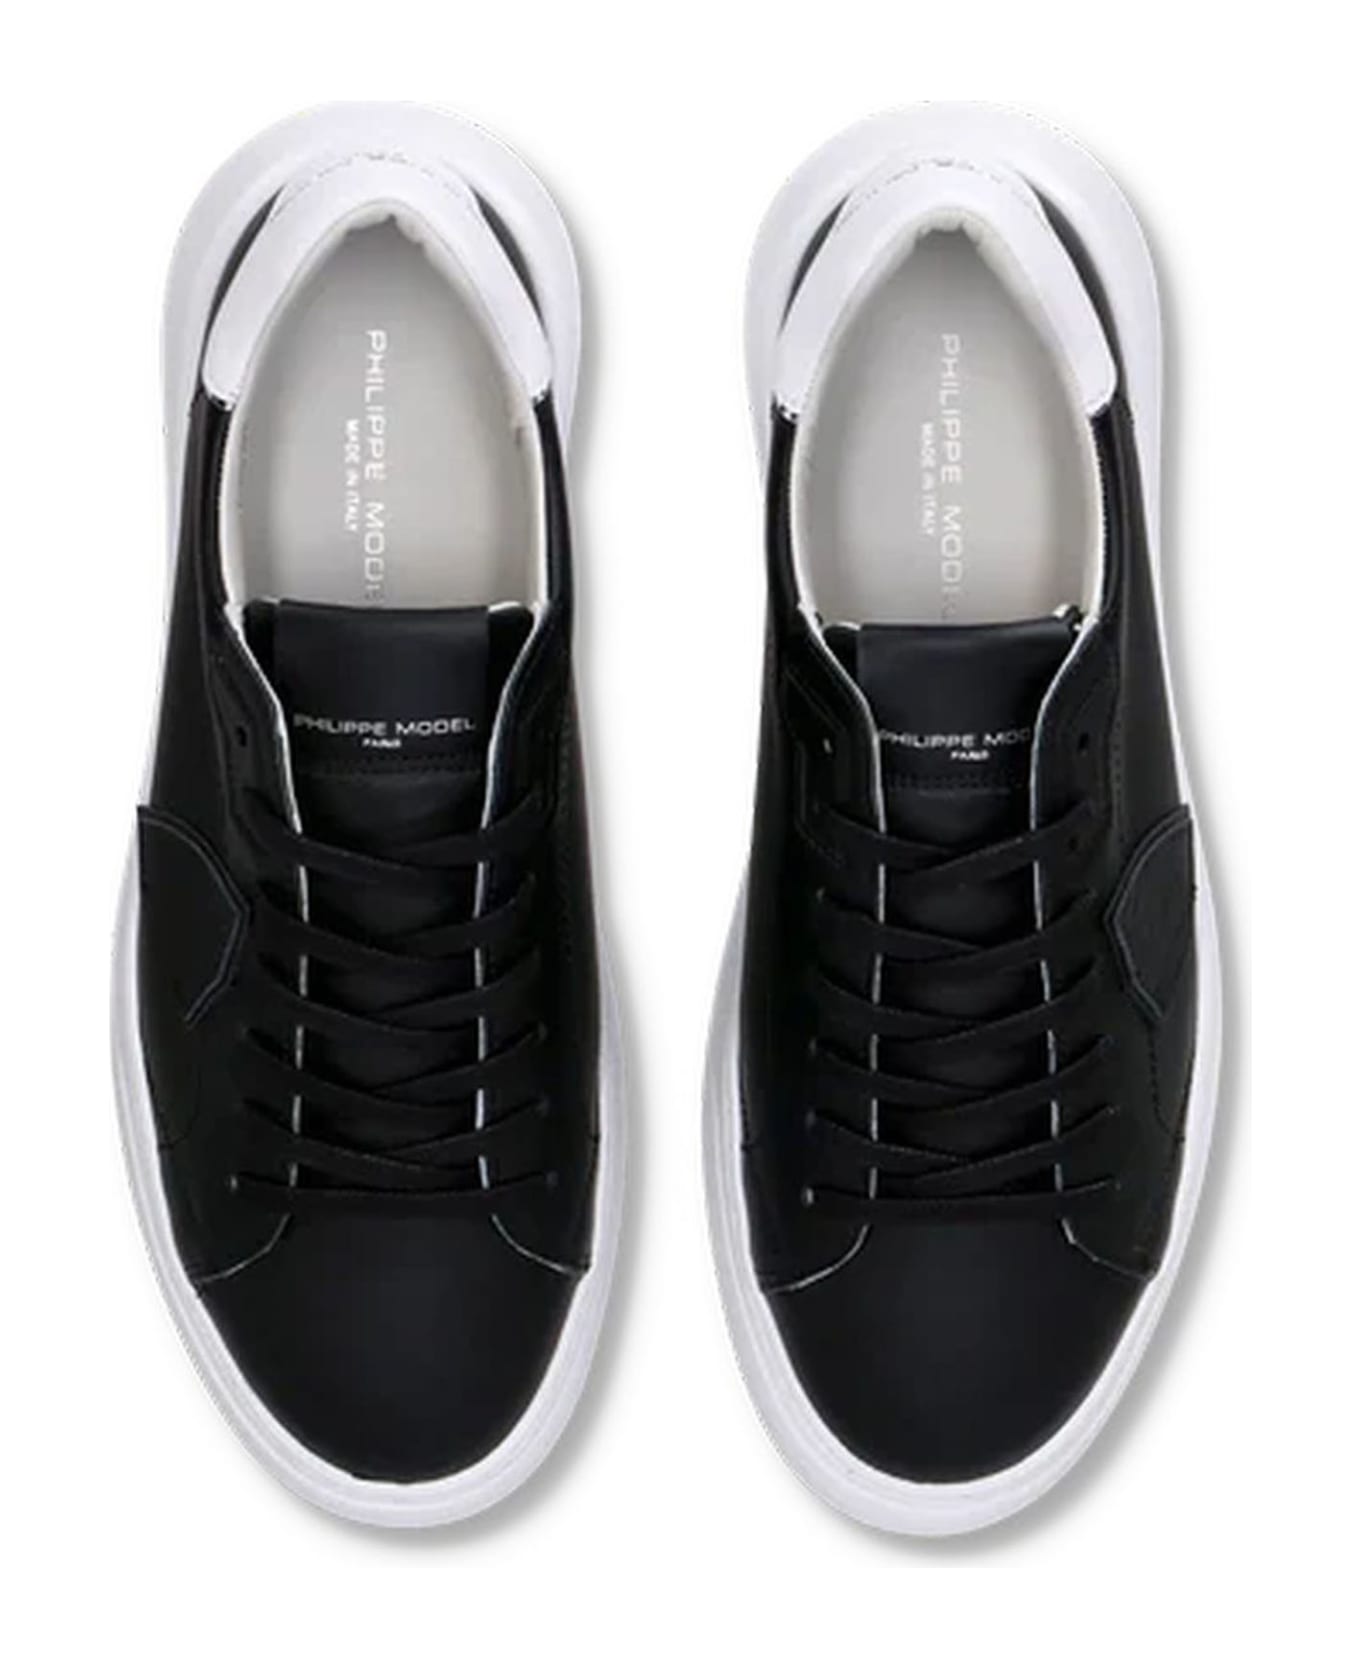 Philippe Model Temple Low-top Sneakers Black And White - Black スニーカー